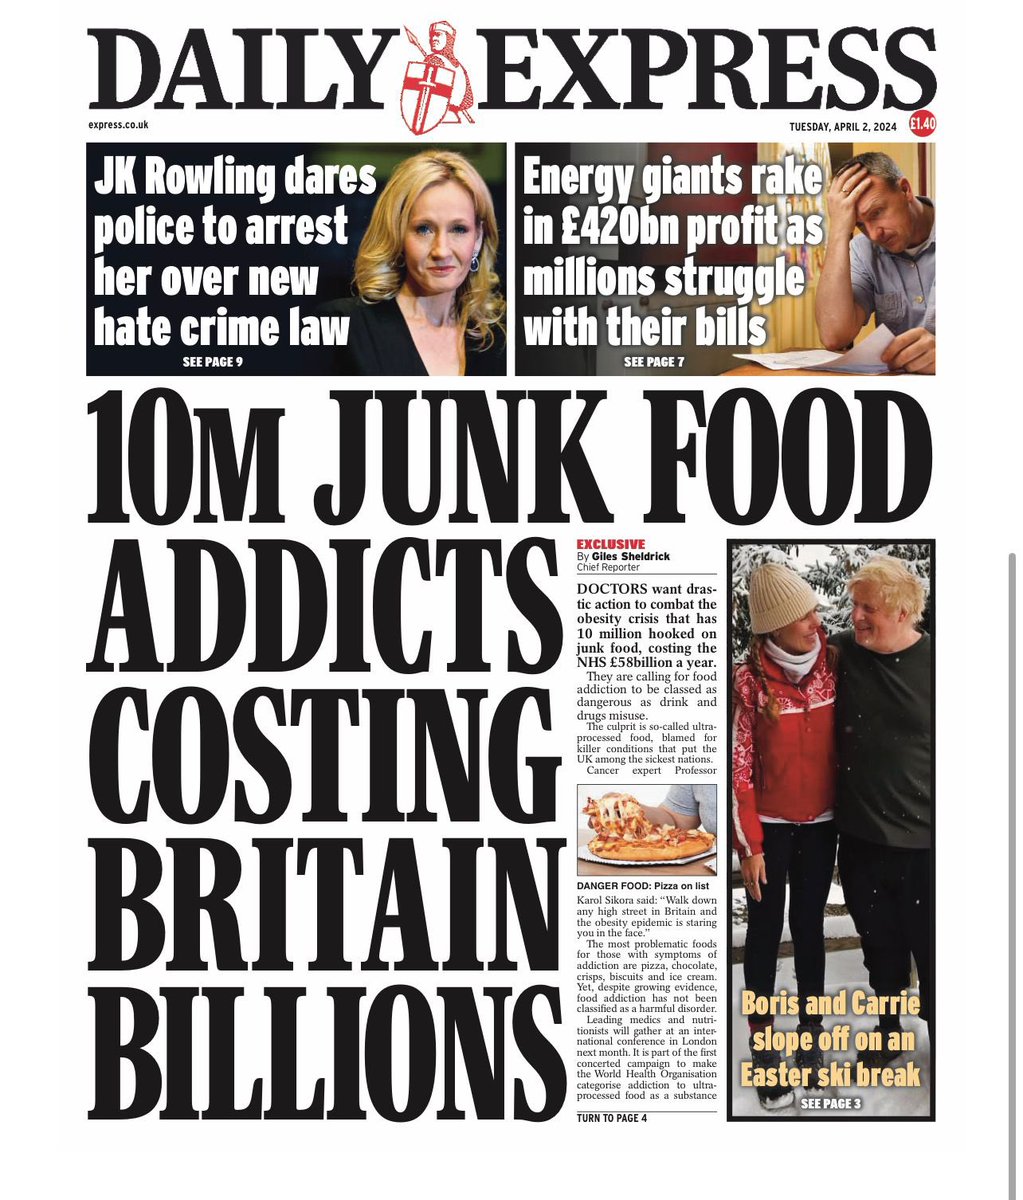 AT LAST !! Food addiction is where it should be FRONT PAGE NEWS- BOOM! express.co.uk/news/uk/188383… JUNK FOOD ADDICTION explains so much suffering & Obesity We are hosting an international conference on this in London May 17 Help us, come! eventbrite.co.uk/e/internationa…